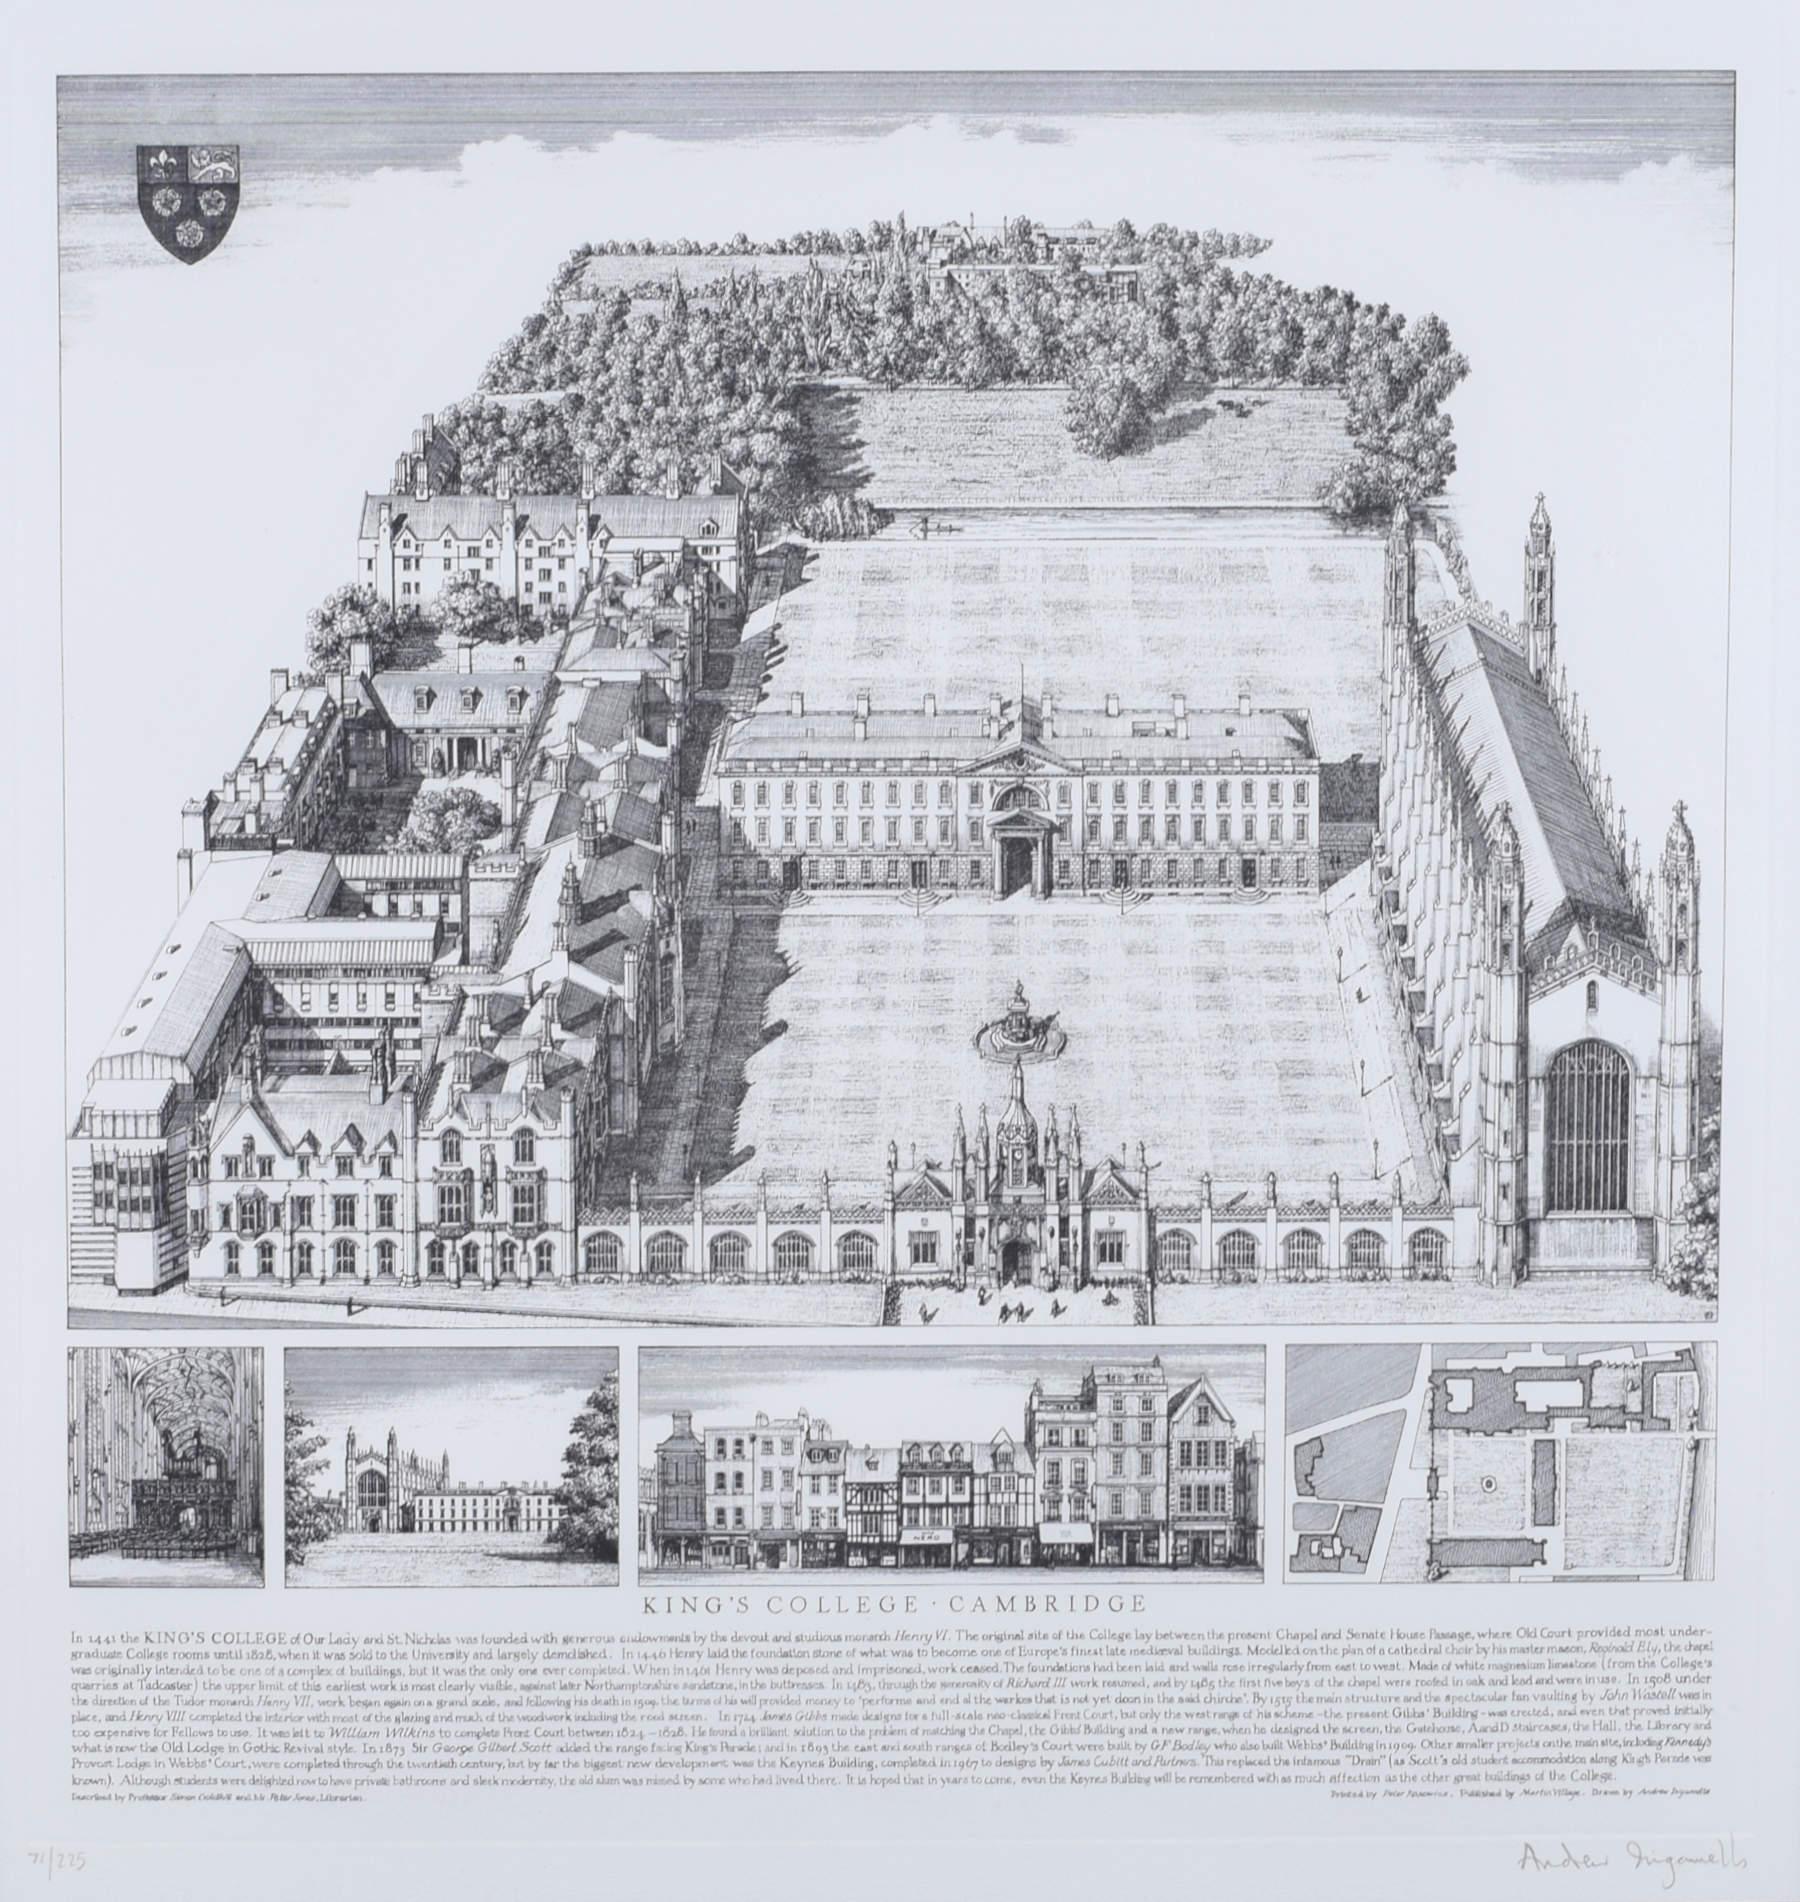 To see our other views of Oxford and Cambridge, scroll down to "More from this Seller" and below it click on "See all from this Seller" - or send us a message if you cannot find the view you want.

Andrew Ingamells (1956 - )
King's College,